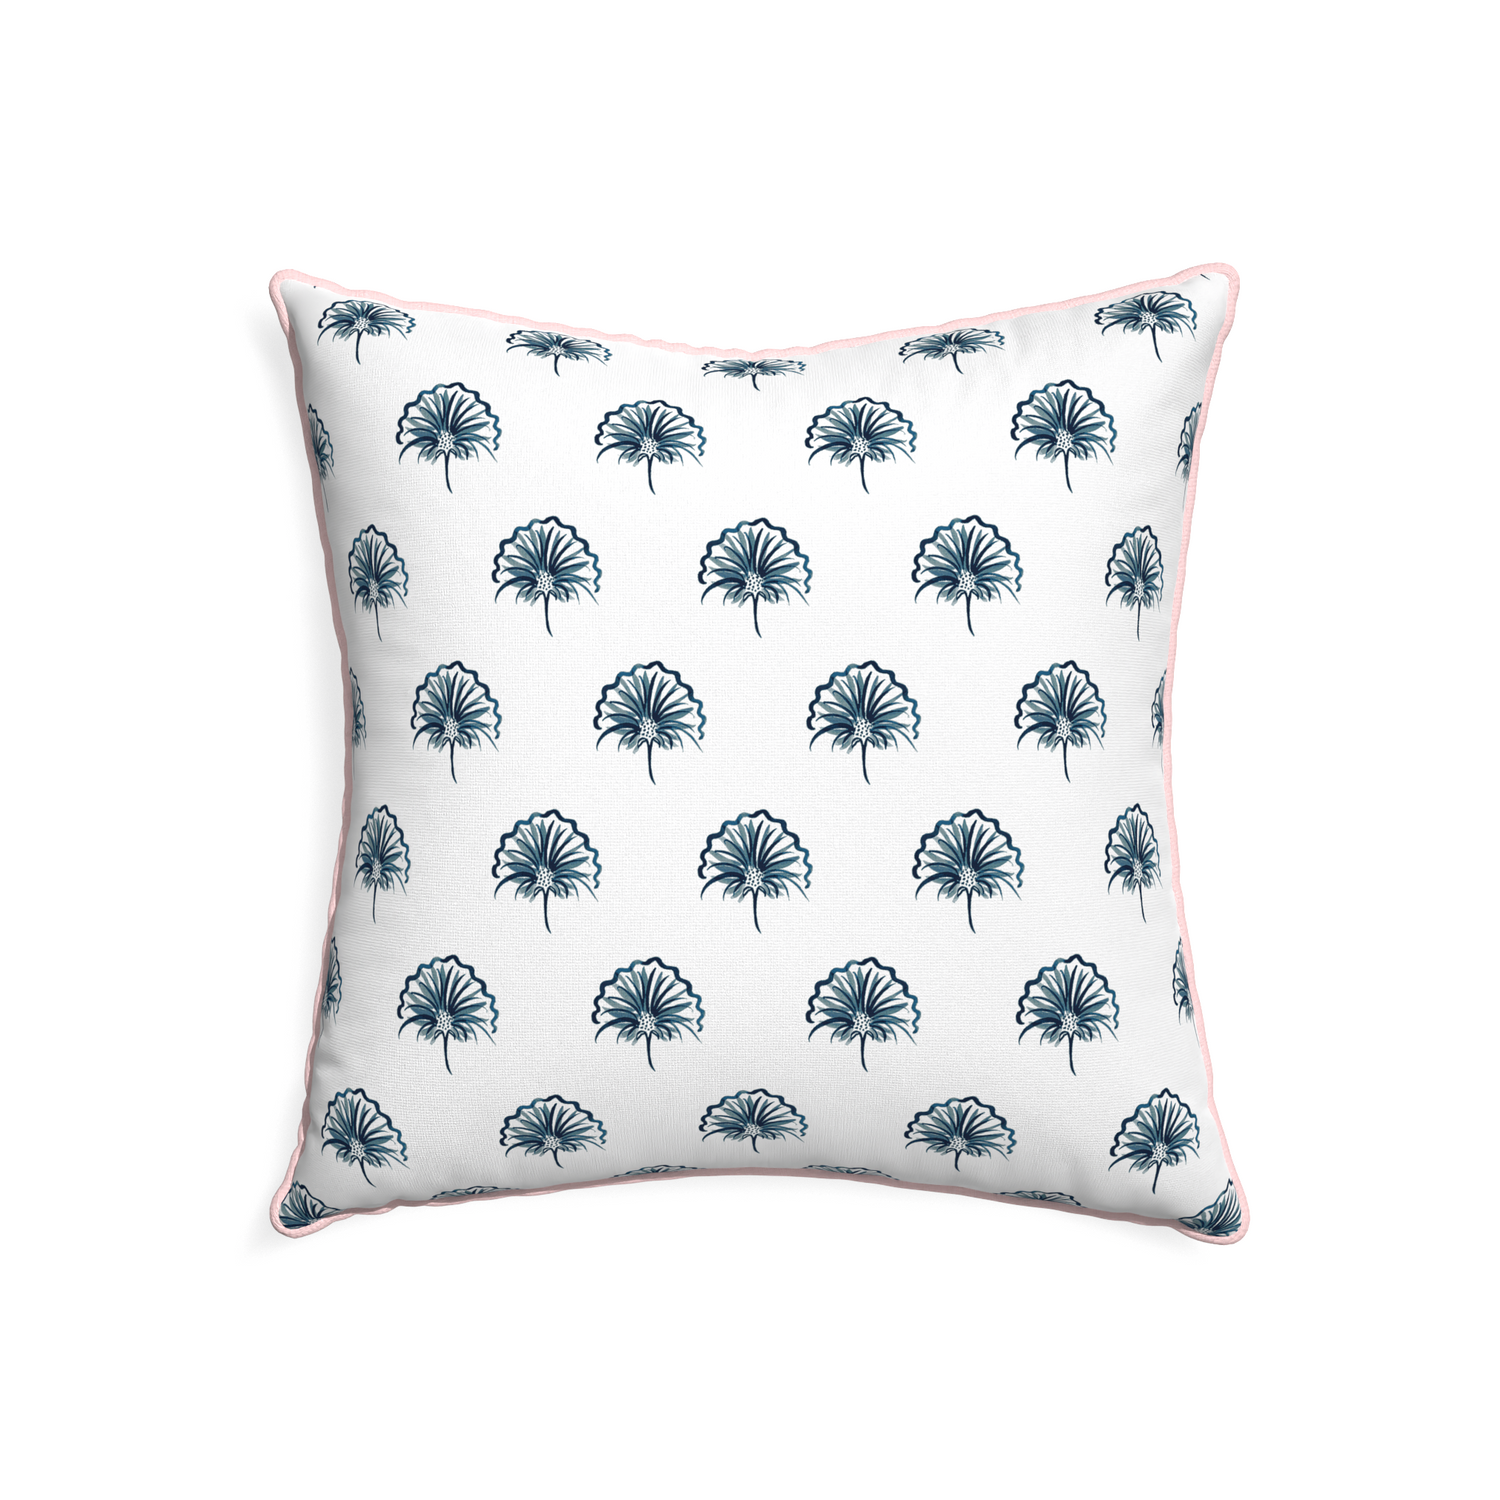 22-square penelope midnight custom floral navypillow with petal piping on white background